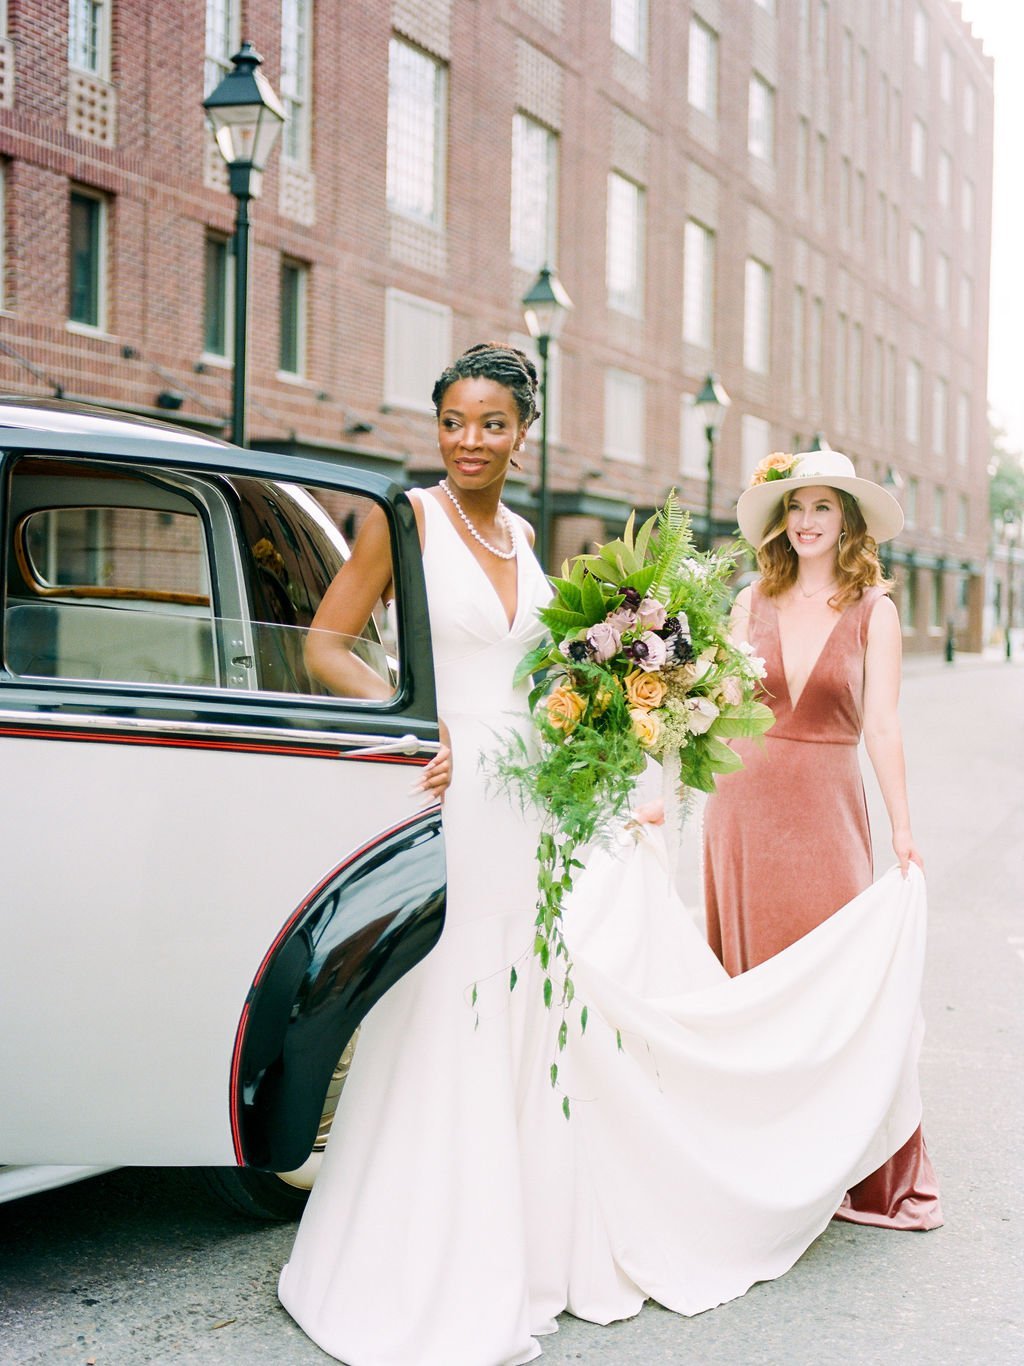 5-things-to-know-before-booking-your-wedding-florist-brought-to-you-by-savannah-wedding-planner-and-savannah-florist-ivory-and-beau-savannah-plant-riverside-district-savannah-wedding-savannah-bridal-shop-maggie-sottero-made-wiith-love-bridal-21.jpg